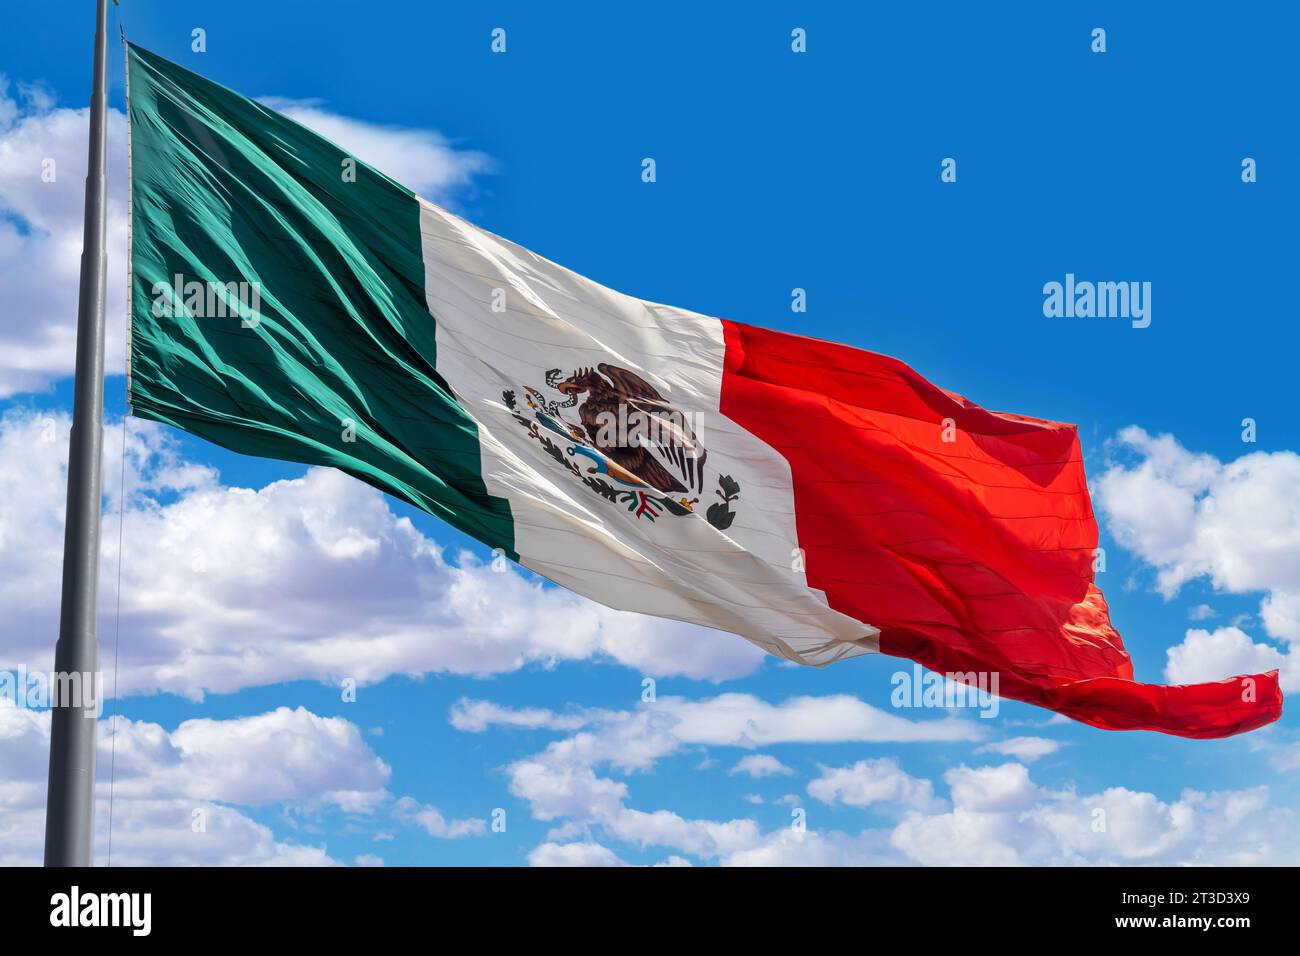 Flag of Mexico on a pole with a background of blue cloudy sky Stock Photo